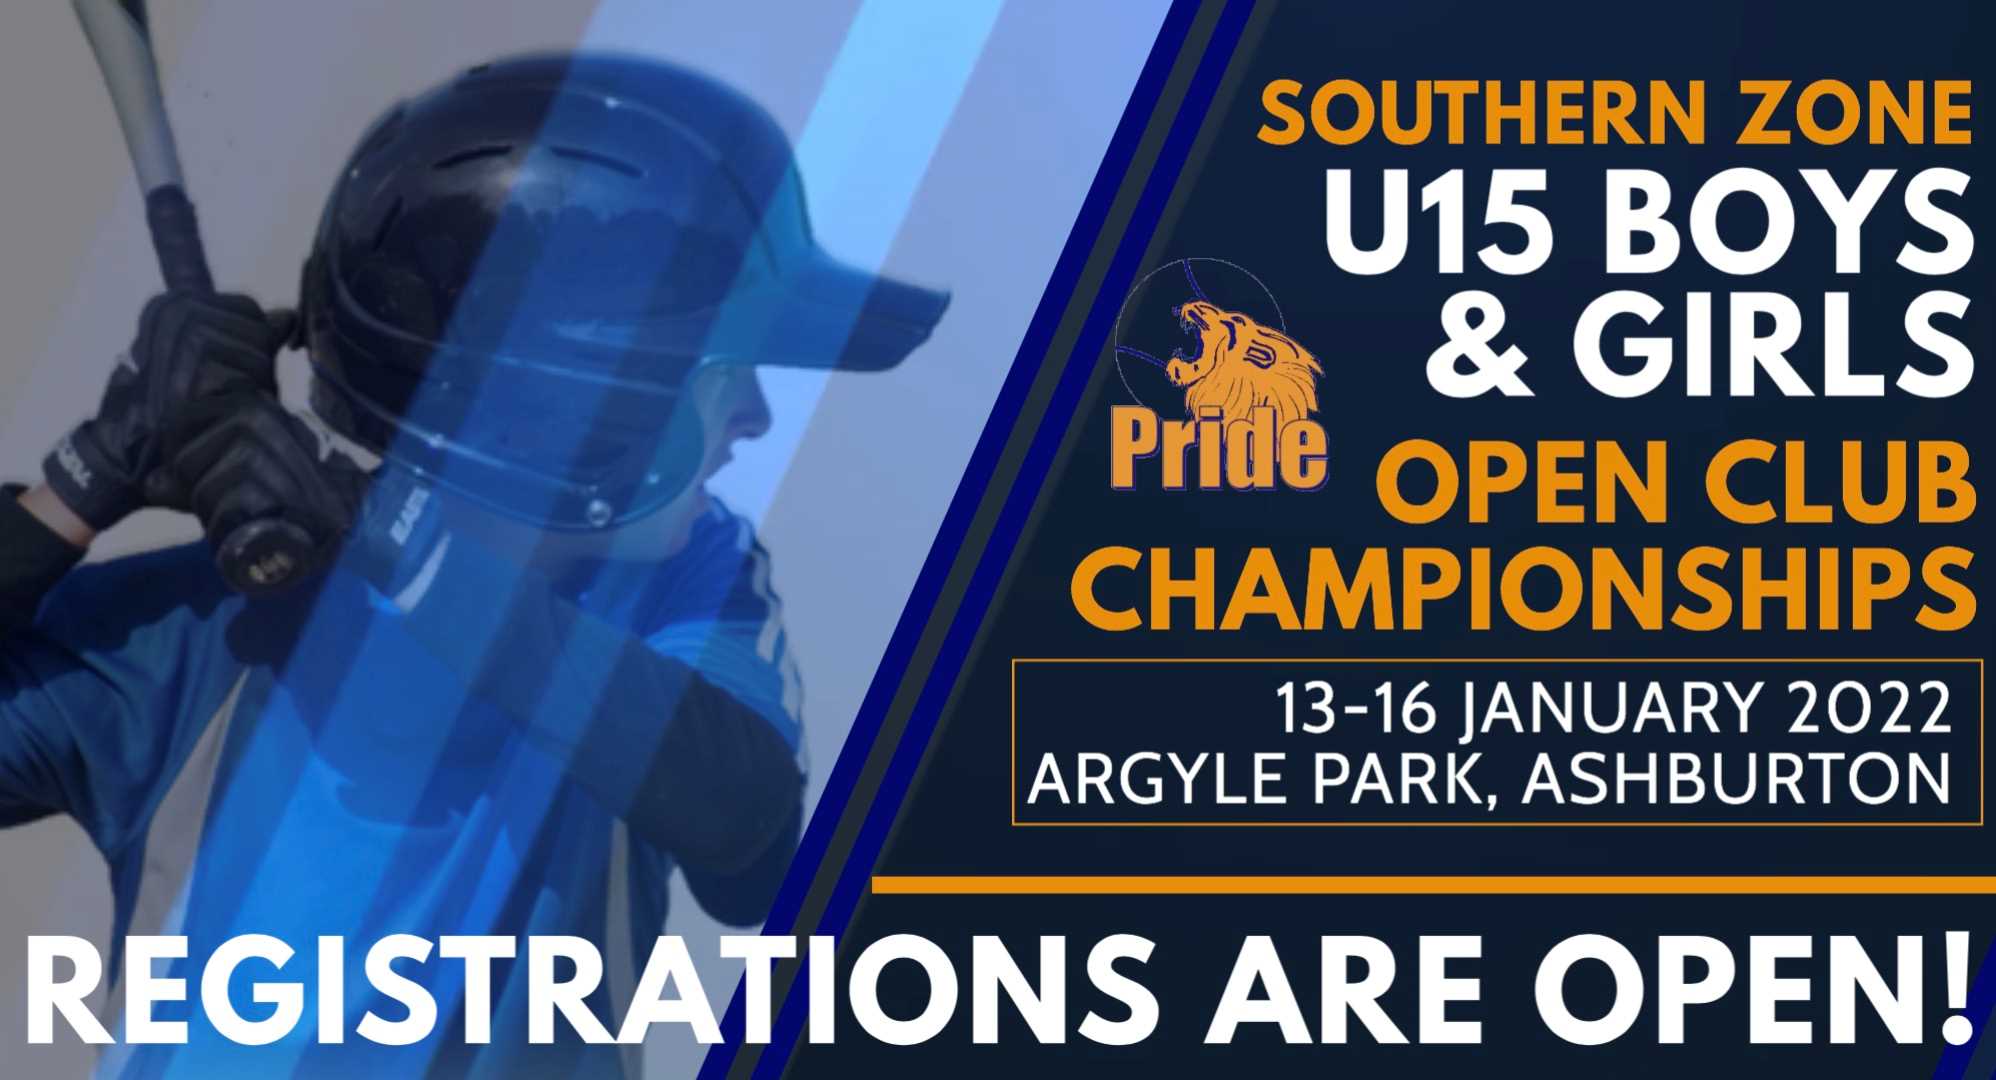 SOUTHERN ZONE U15 OPEN CLUB CHAMPIONSHIPS 2022 REGISTRATIONS ARE OPEN!